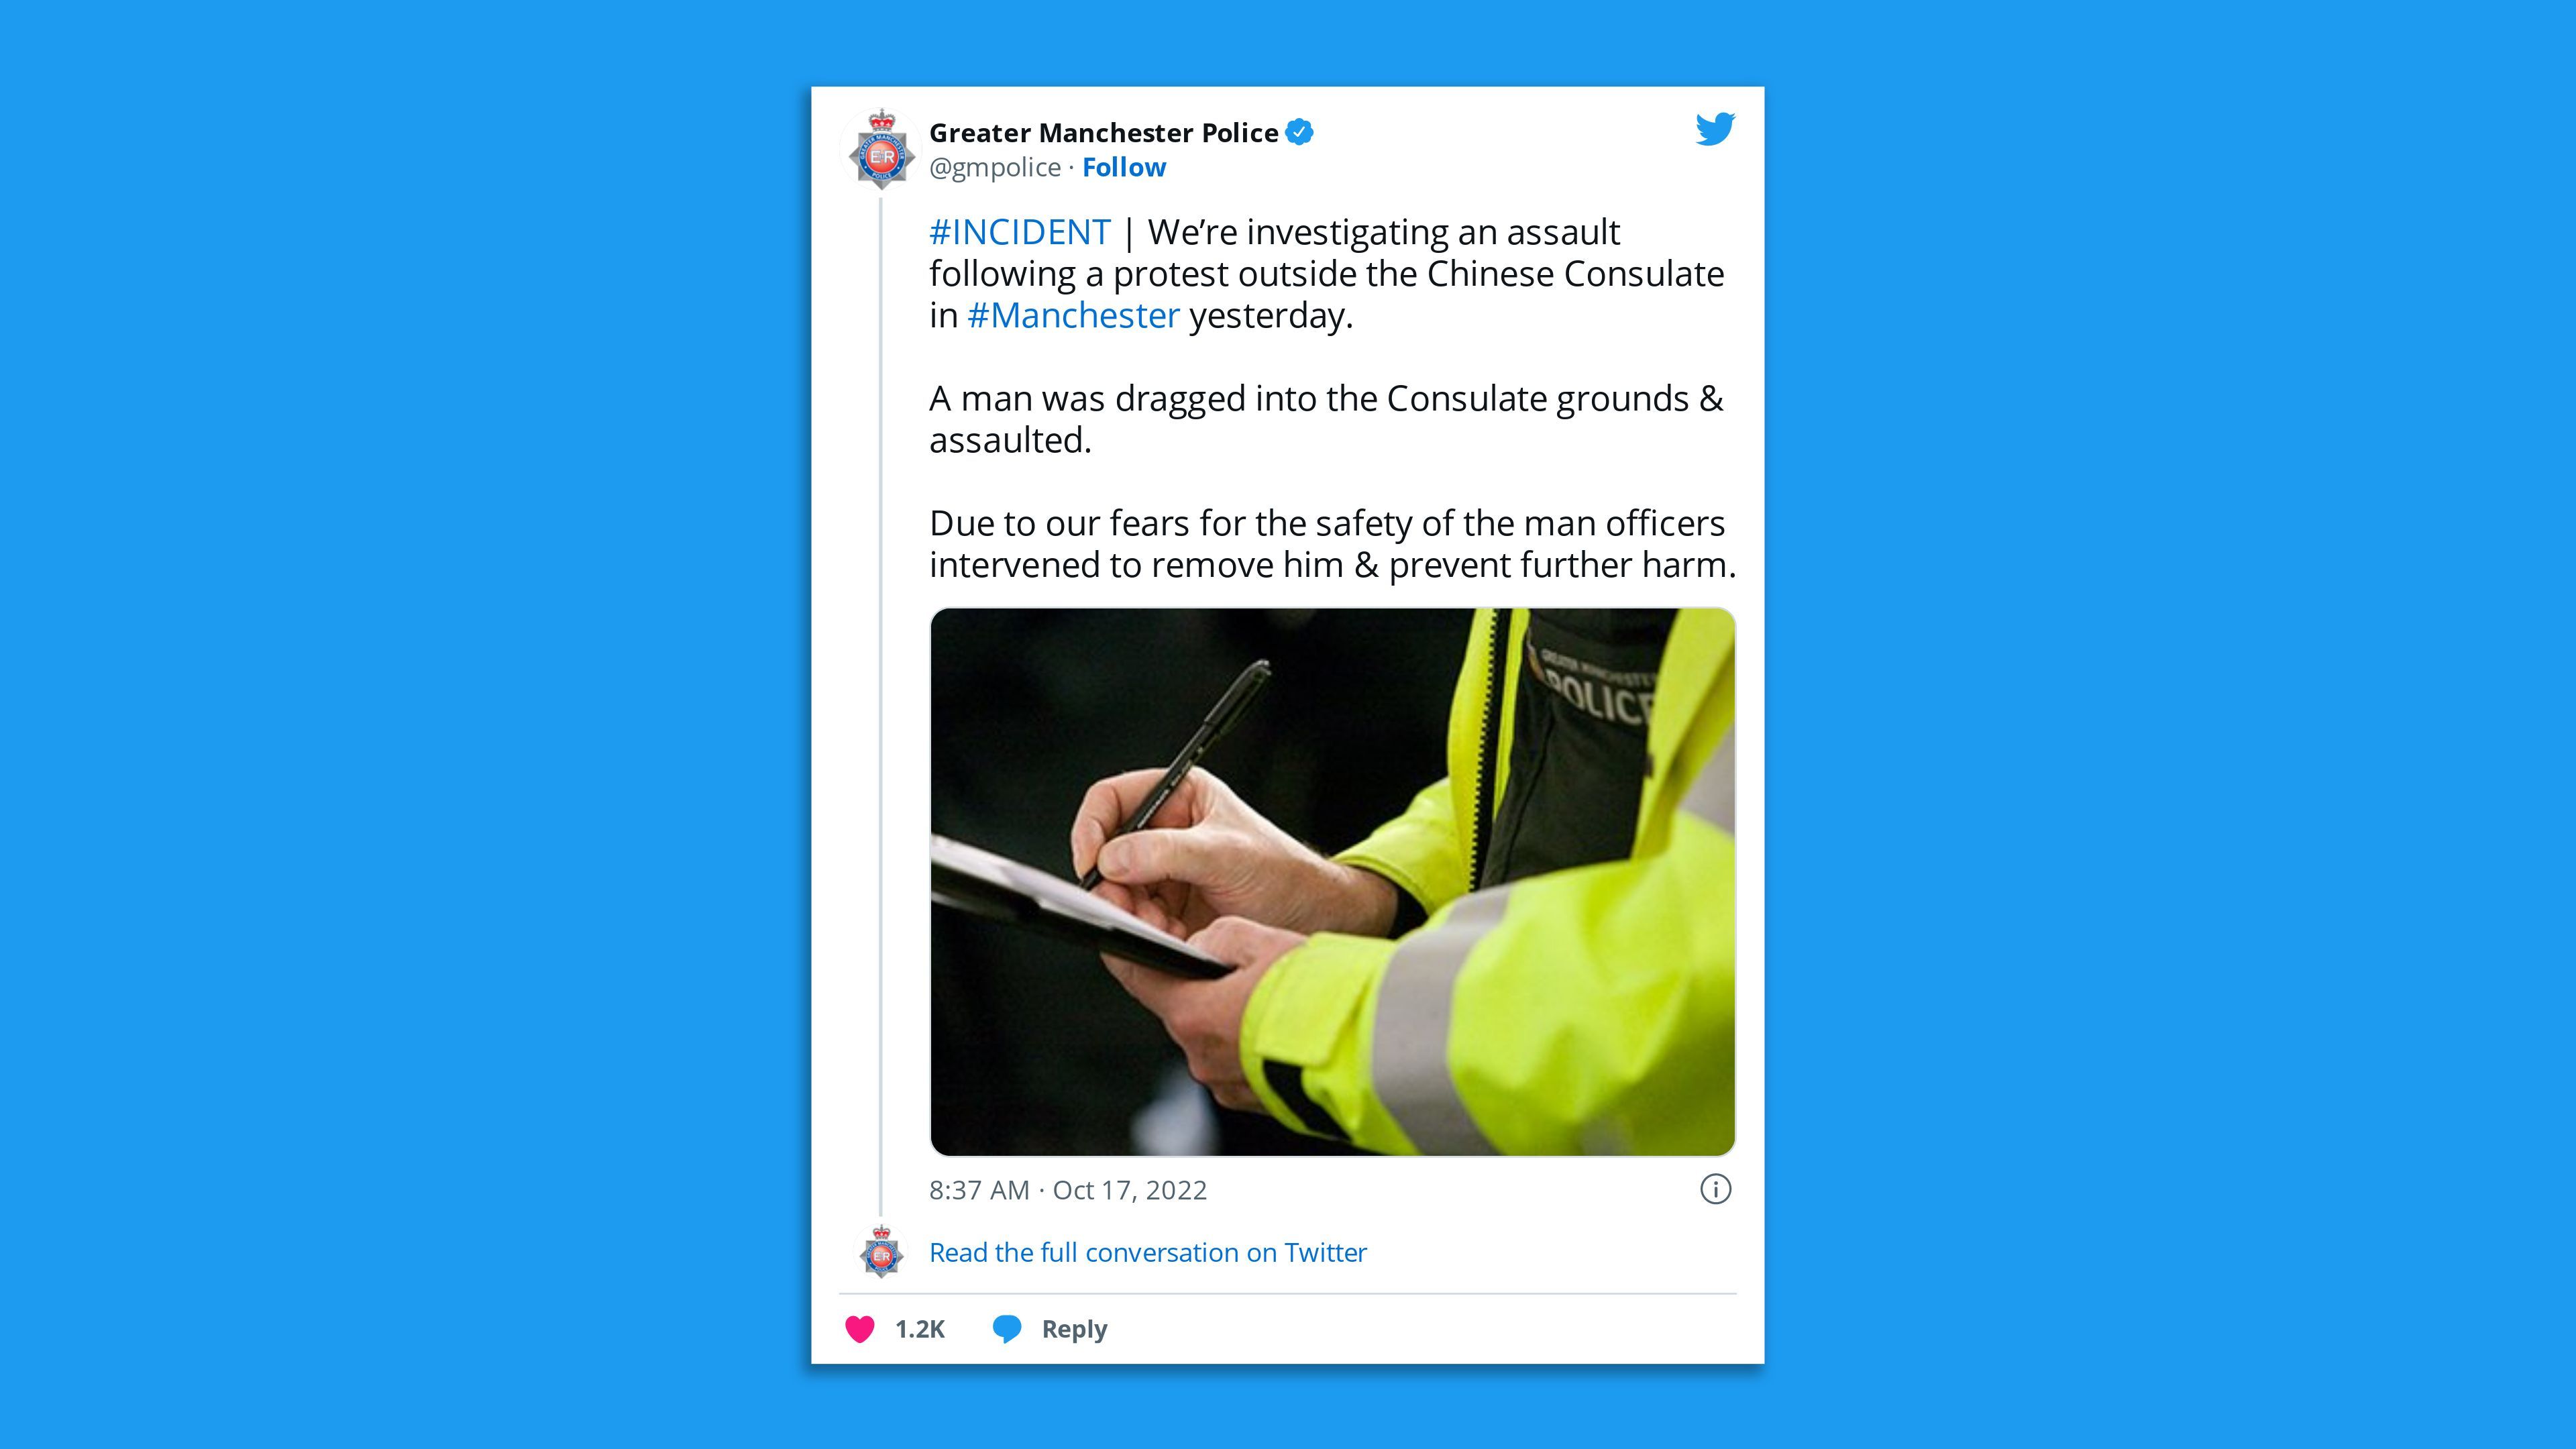 A Manchester Police tweet stating: "A man was dragged into the Consulate grounds & assaulted.  Due to our fears for the safety of the man officers intervened to remove him."